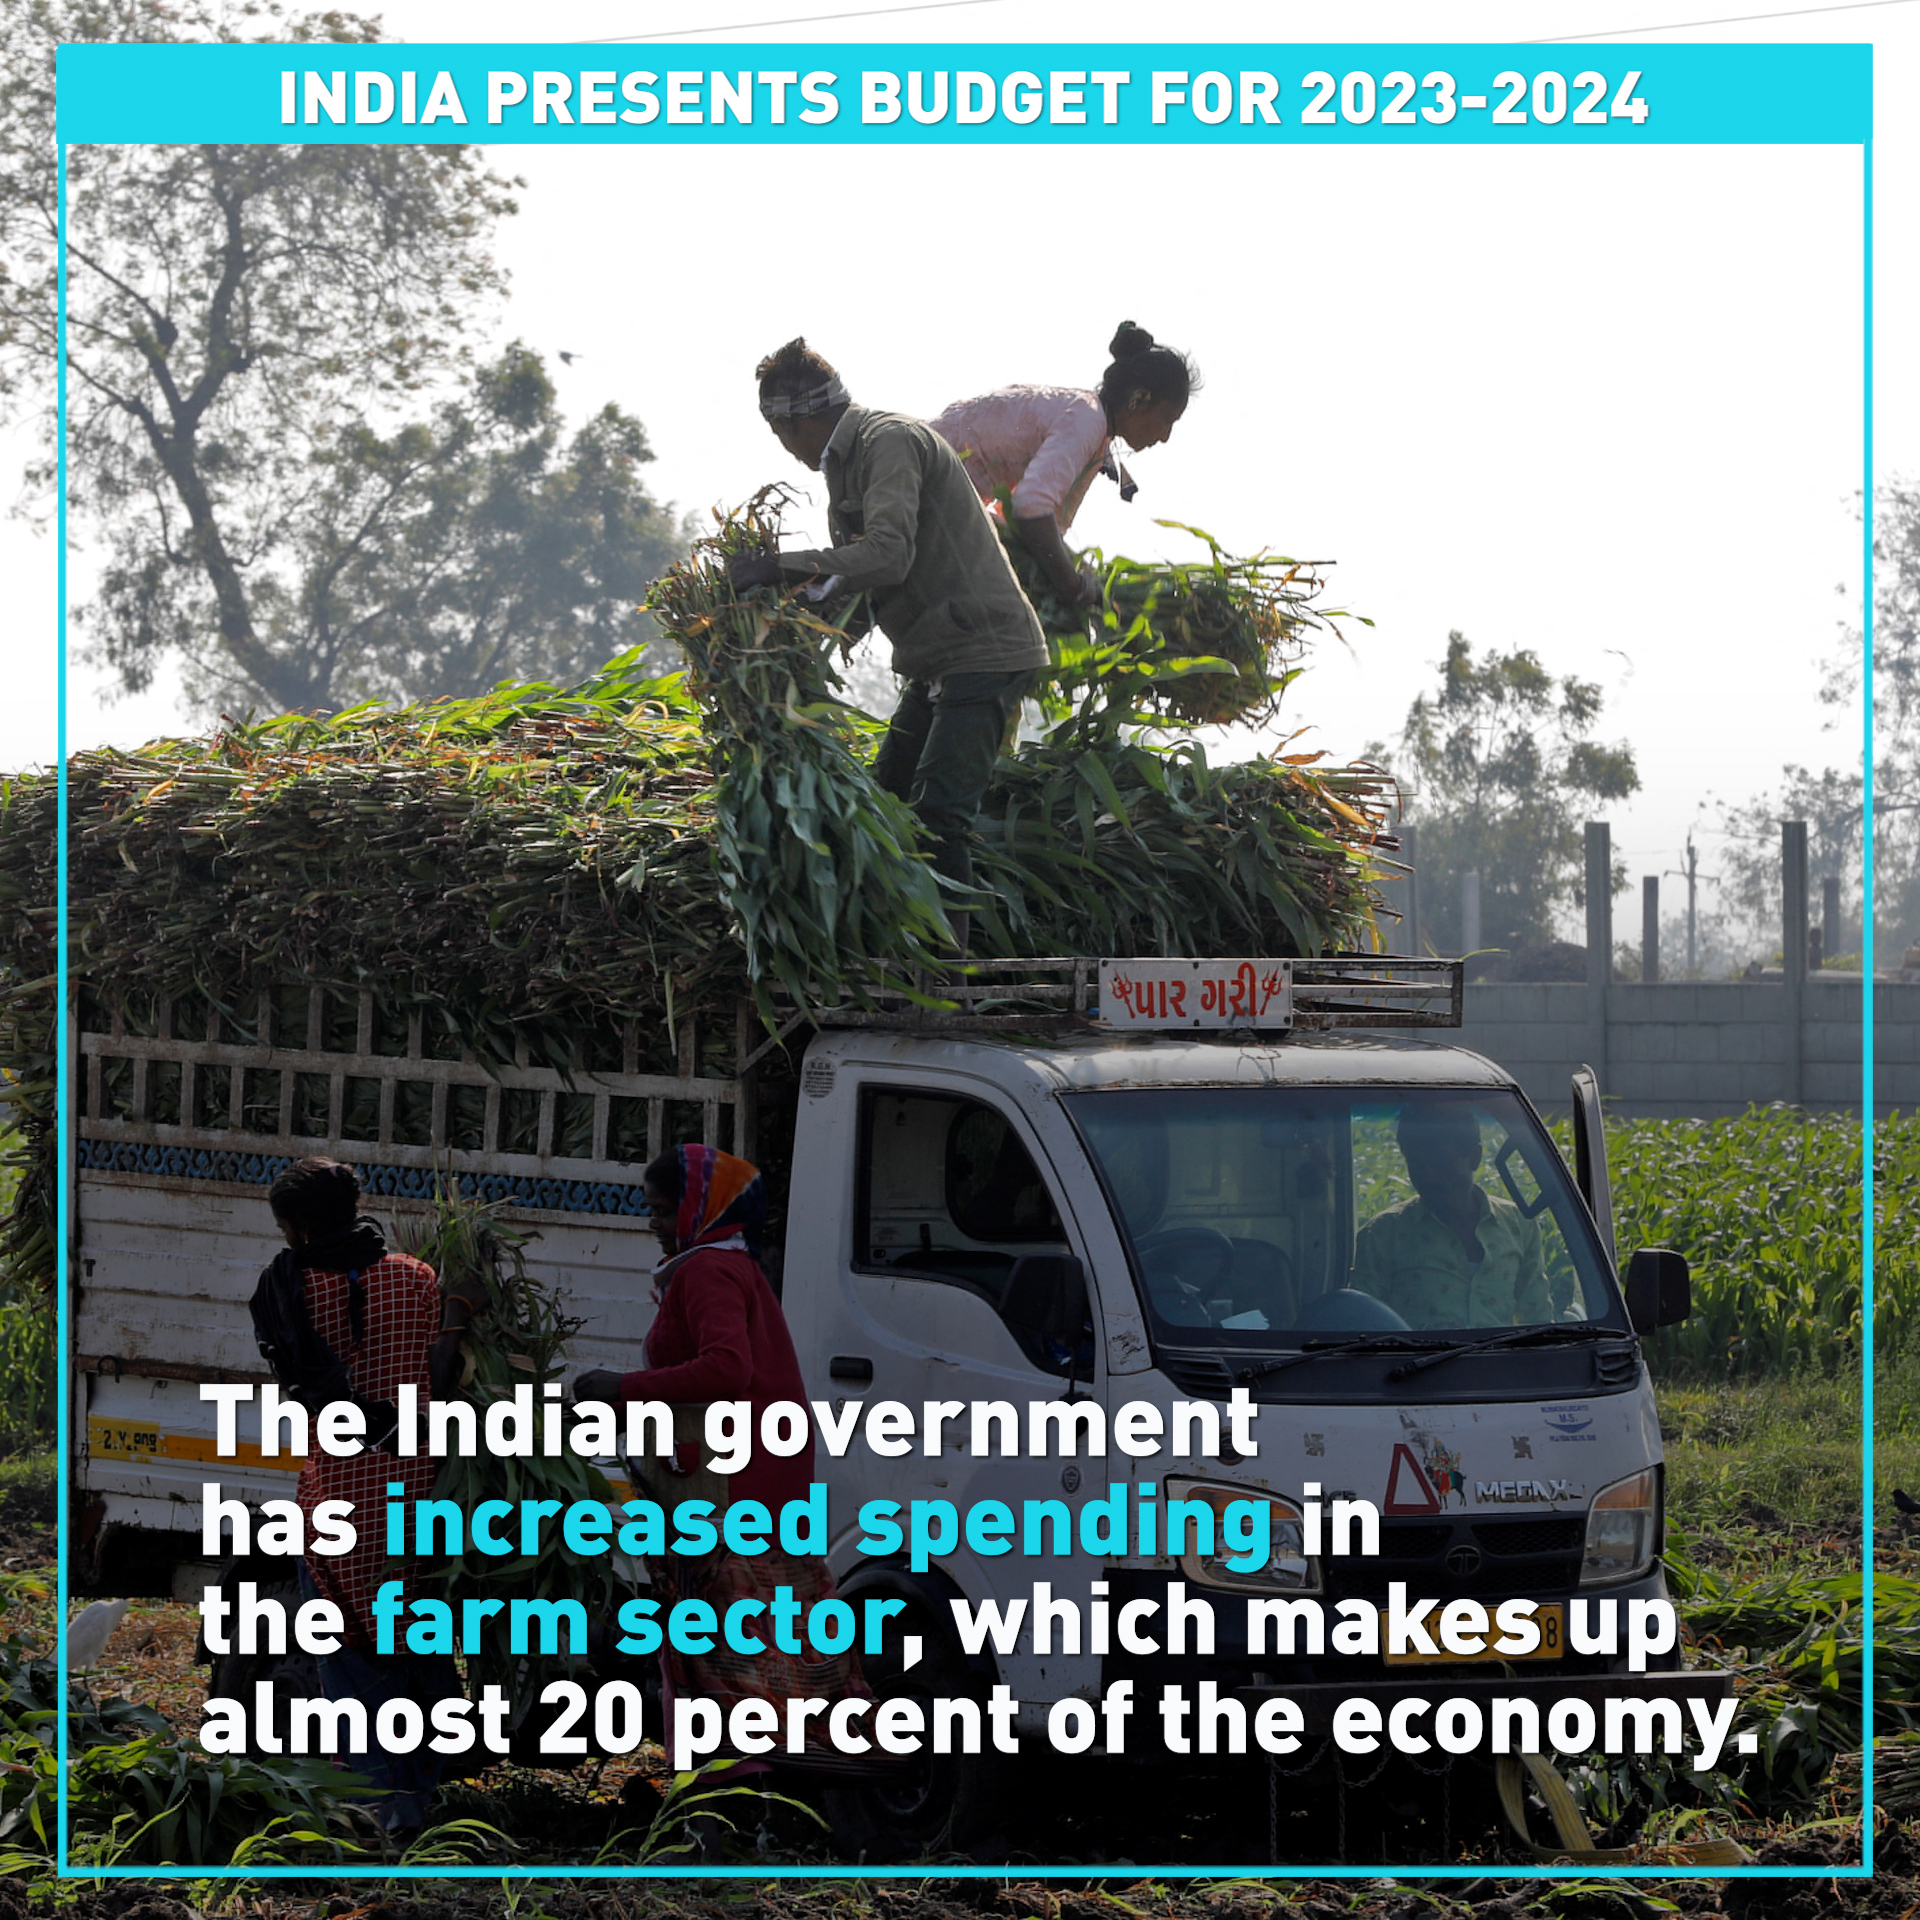 India presents budget for fiscal year 2023-2024